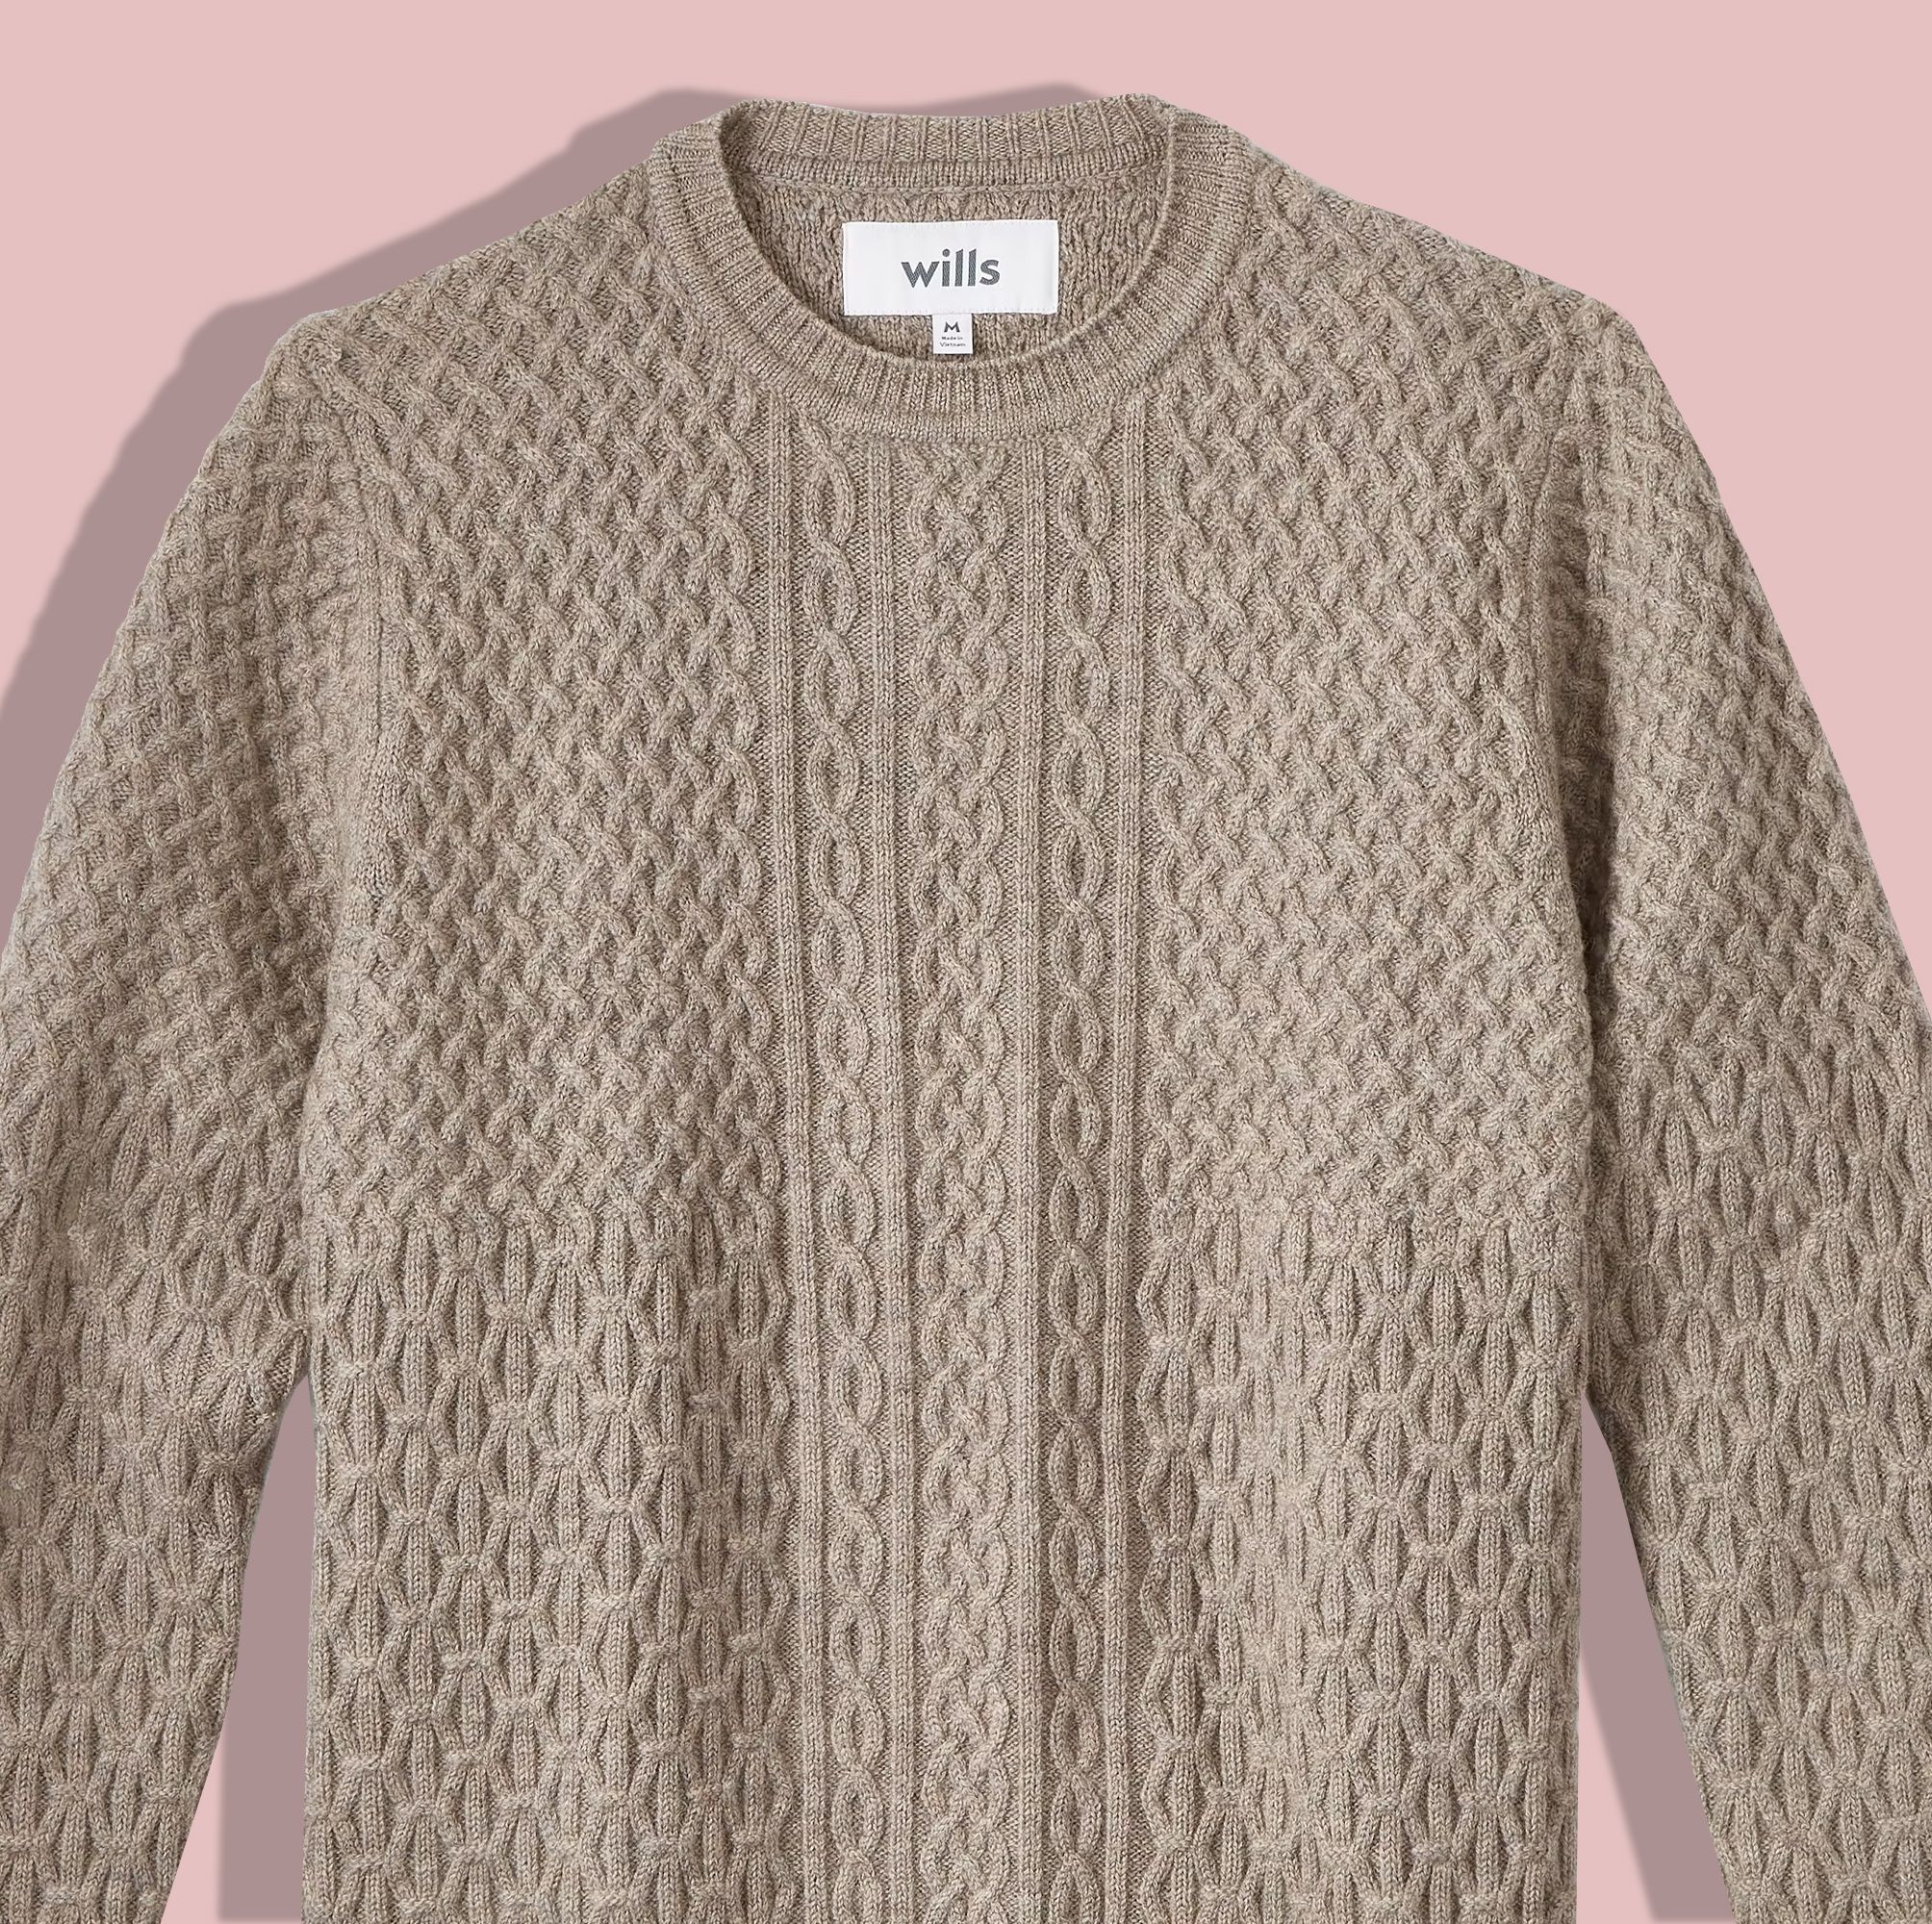 The Right Cable Knit Sweater Can Transform Anyone Into a Bona Fide 'Sweater Guy'